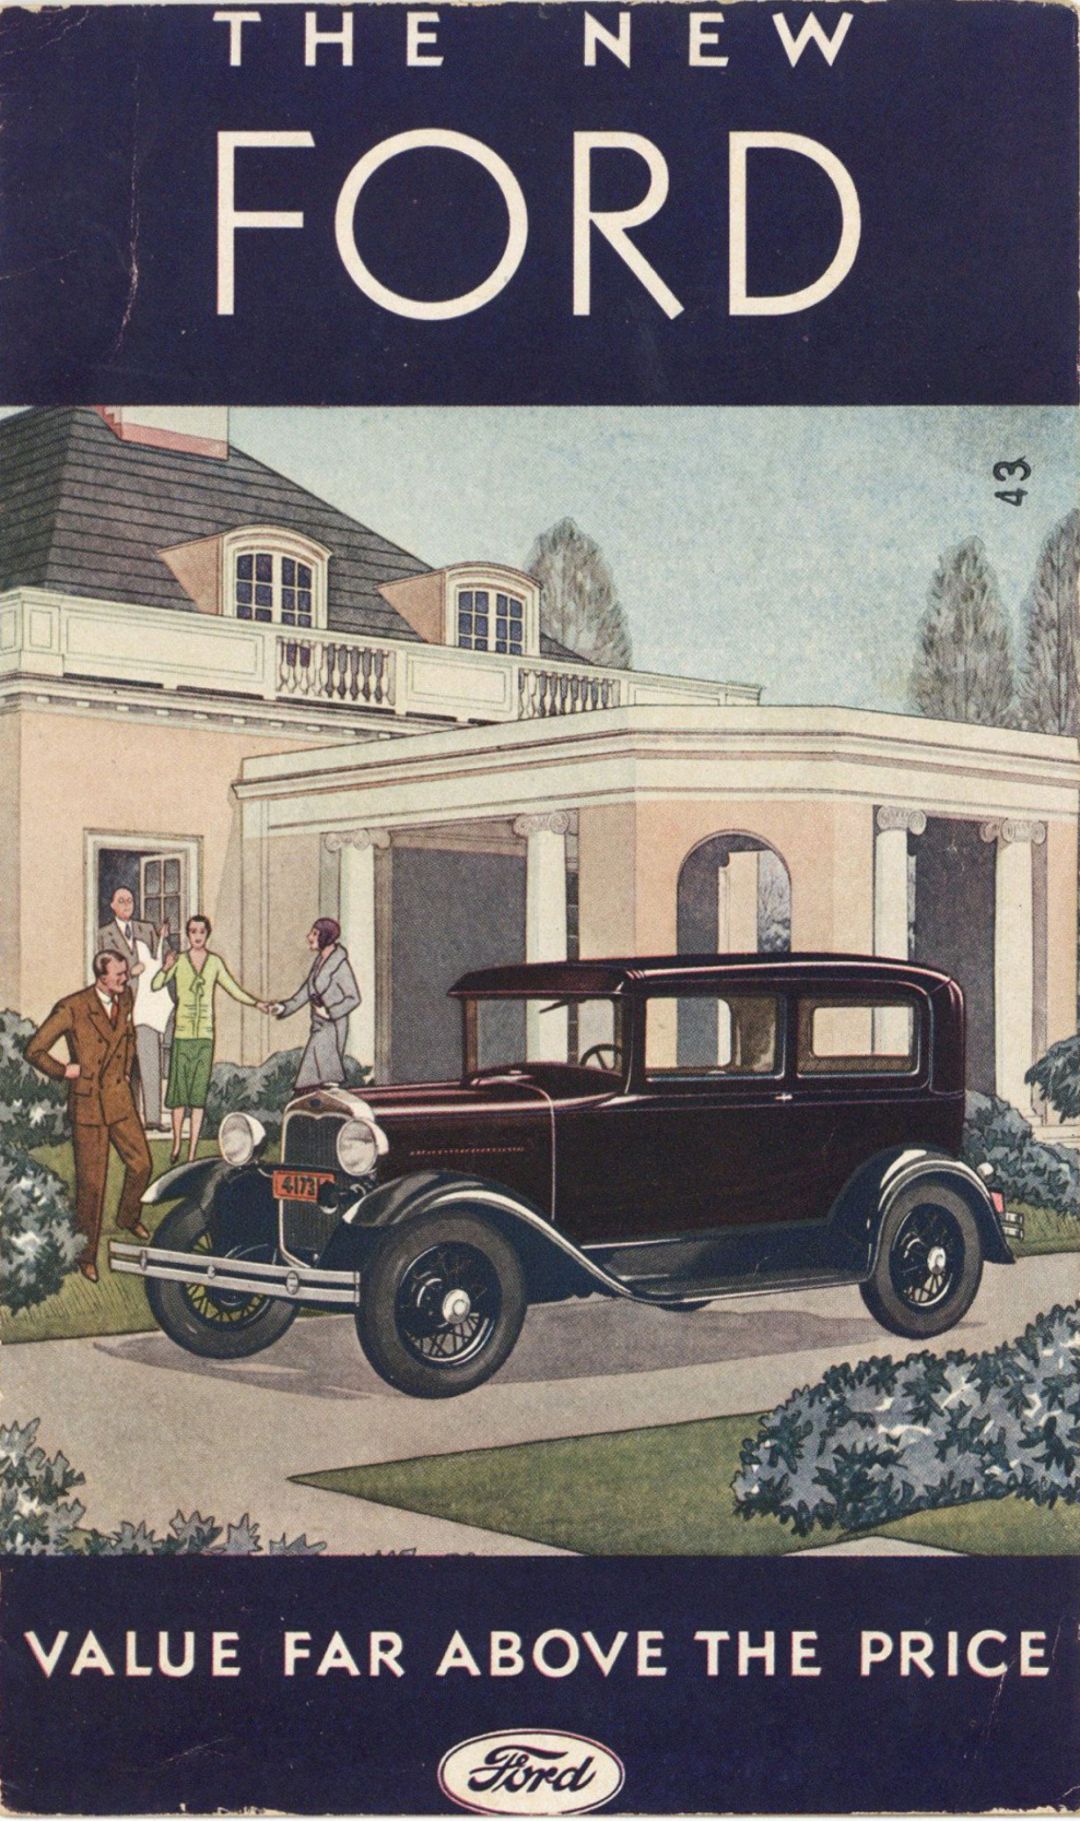 The New Ford Pamphlet - Ford Motor Co. - 1930's dated Americana